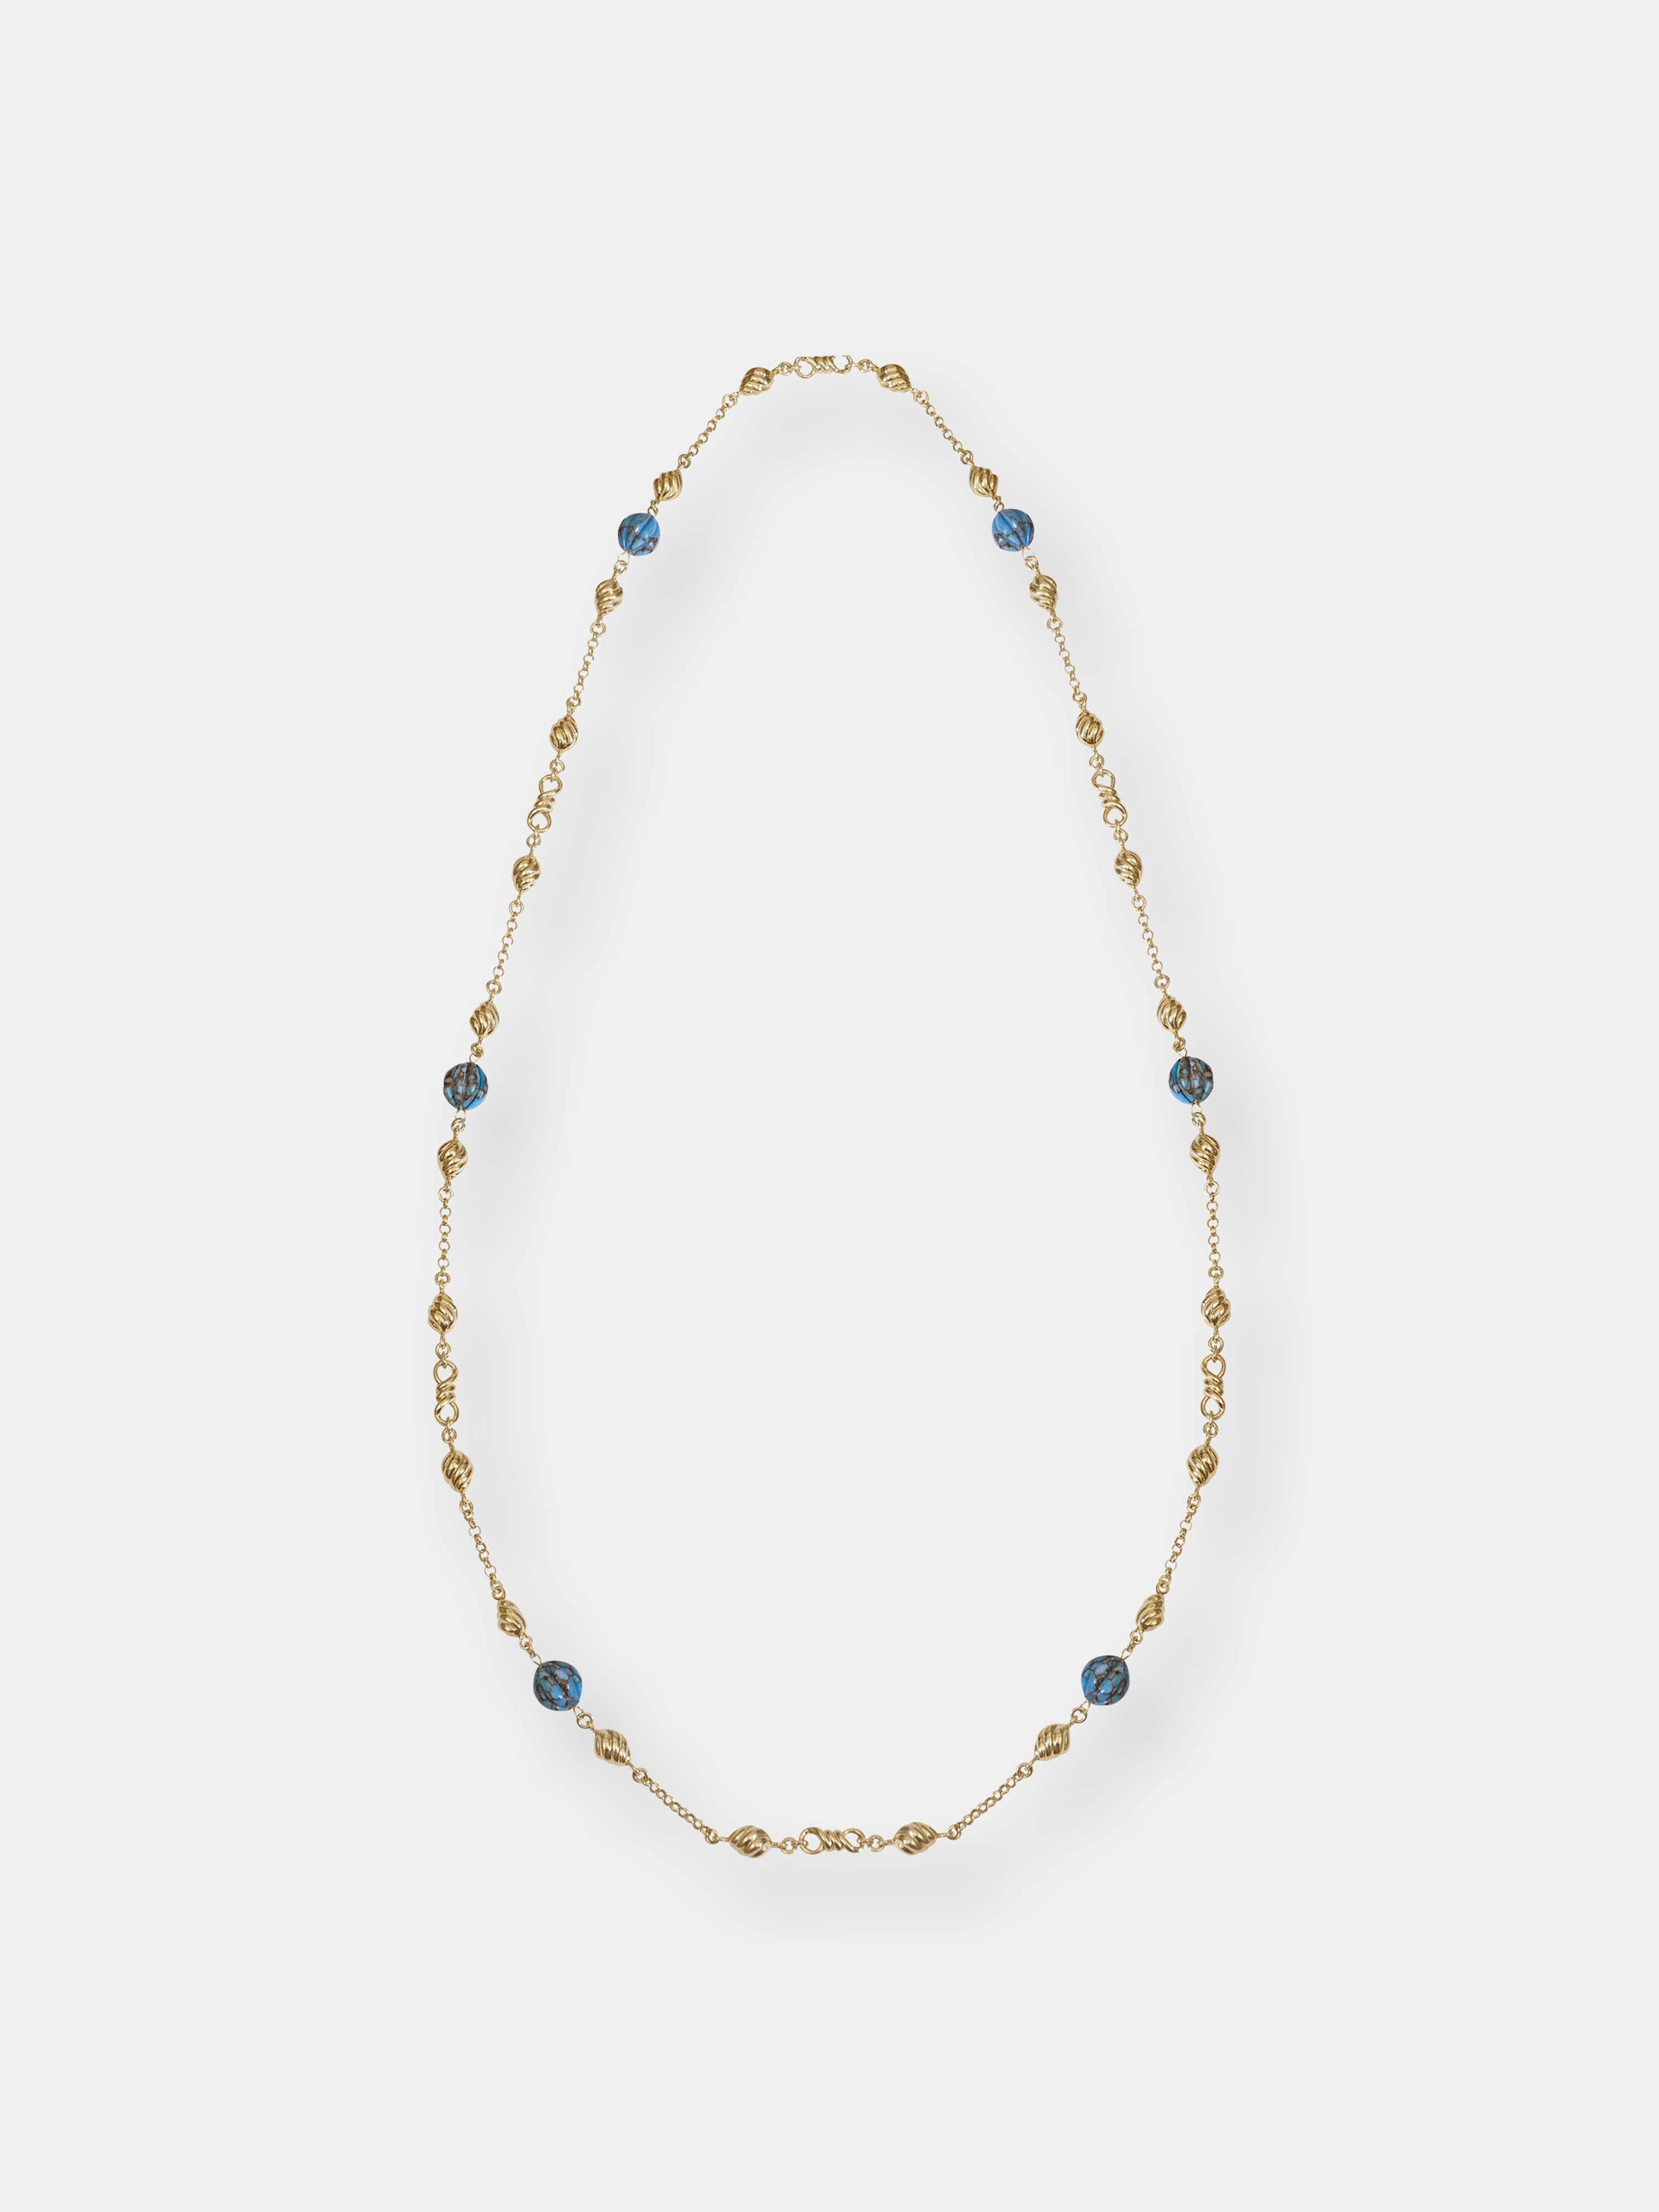 Luvmyjewelry Summer Nights Turquoise Layered Necklace In 14k Yellow Gold Plated Sterling Silver